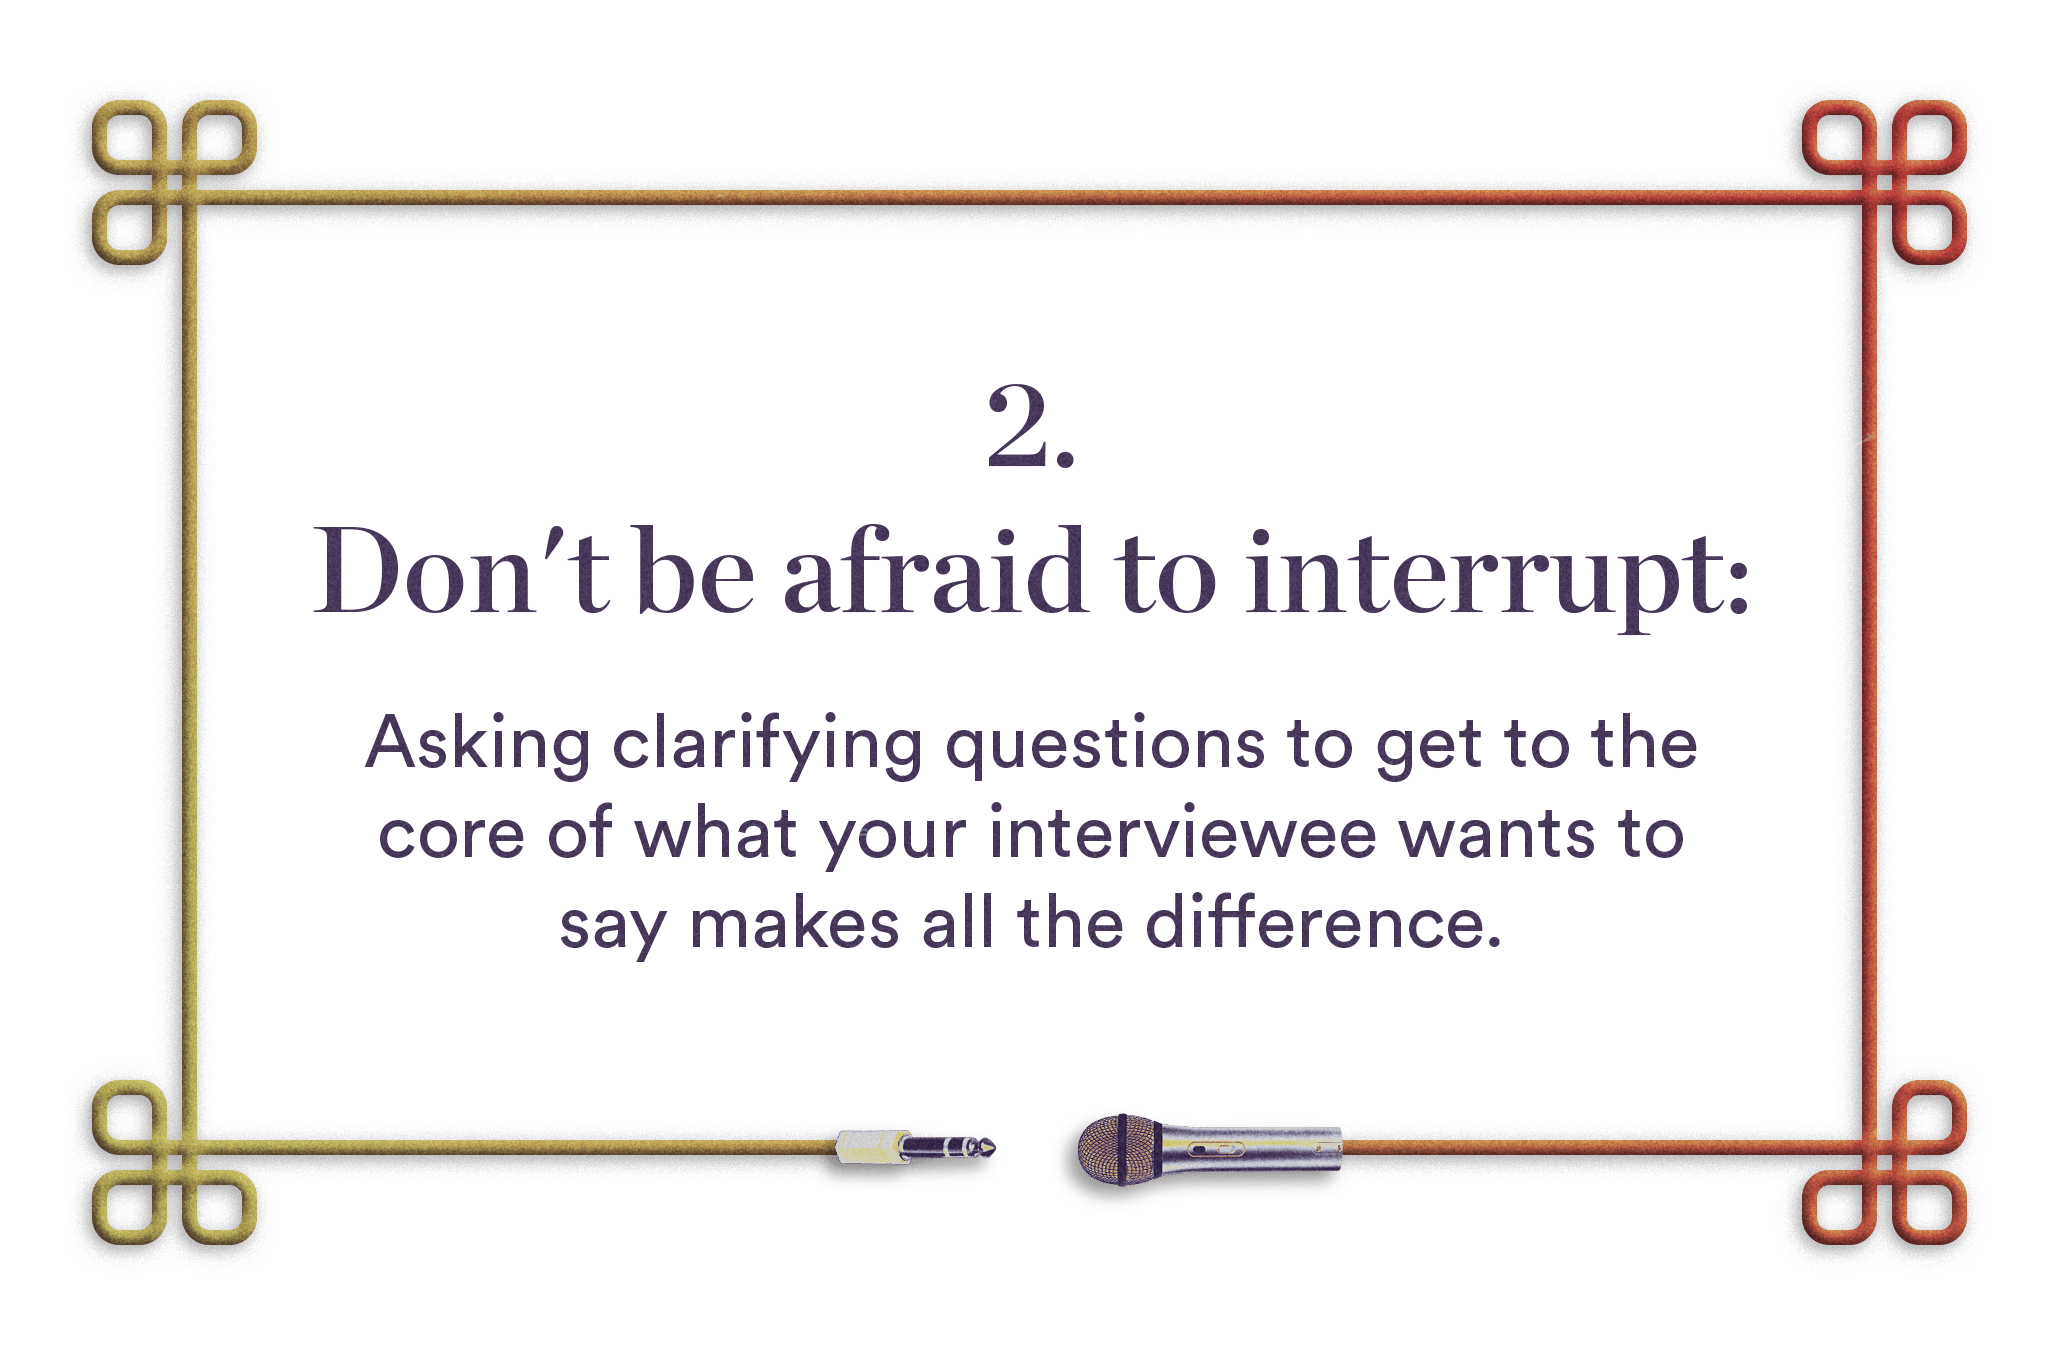 2. Don't be afraid to interrupt - Asking clarifying questions to get to the core of what your interviewee wants to say makes all the difference.